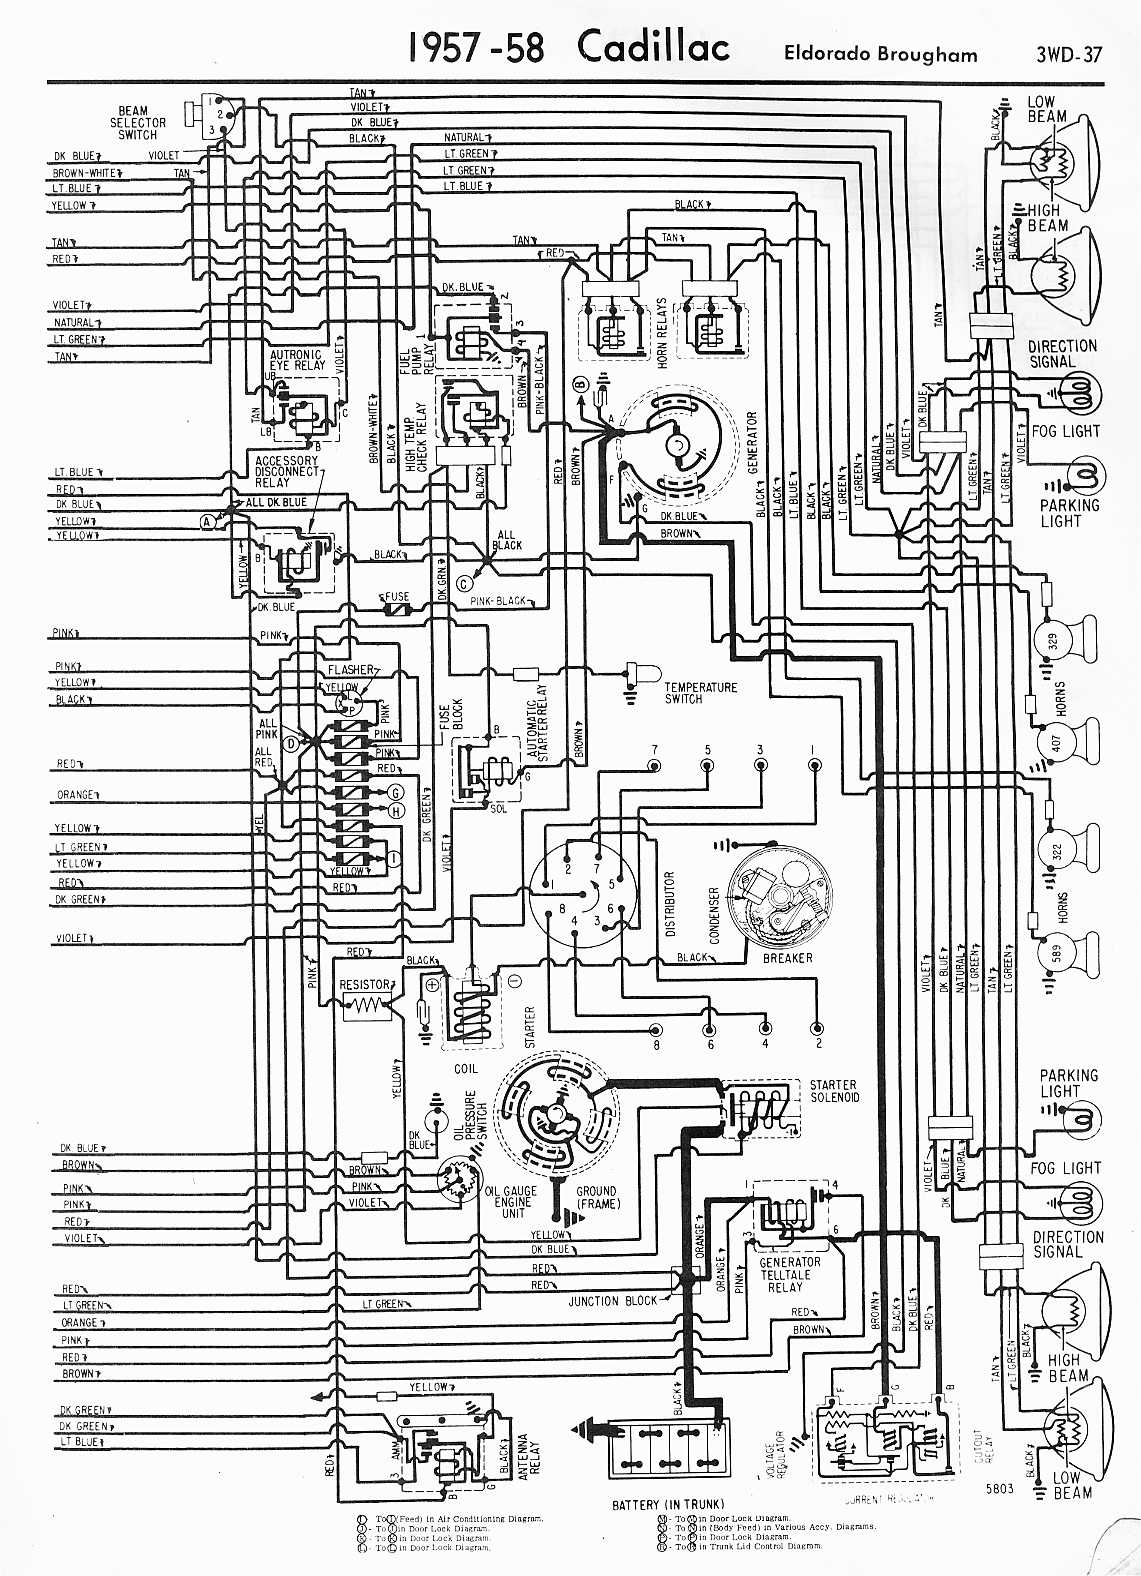 2001 Cadillac Deville Wiring Harness from www.oldcarmanualproject.com